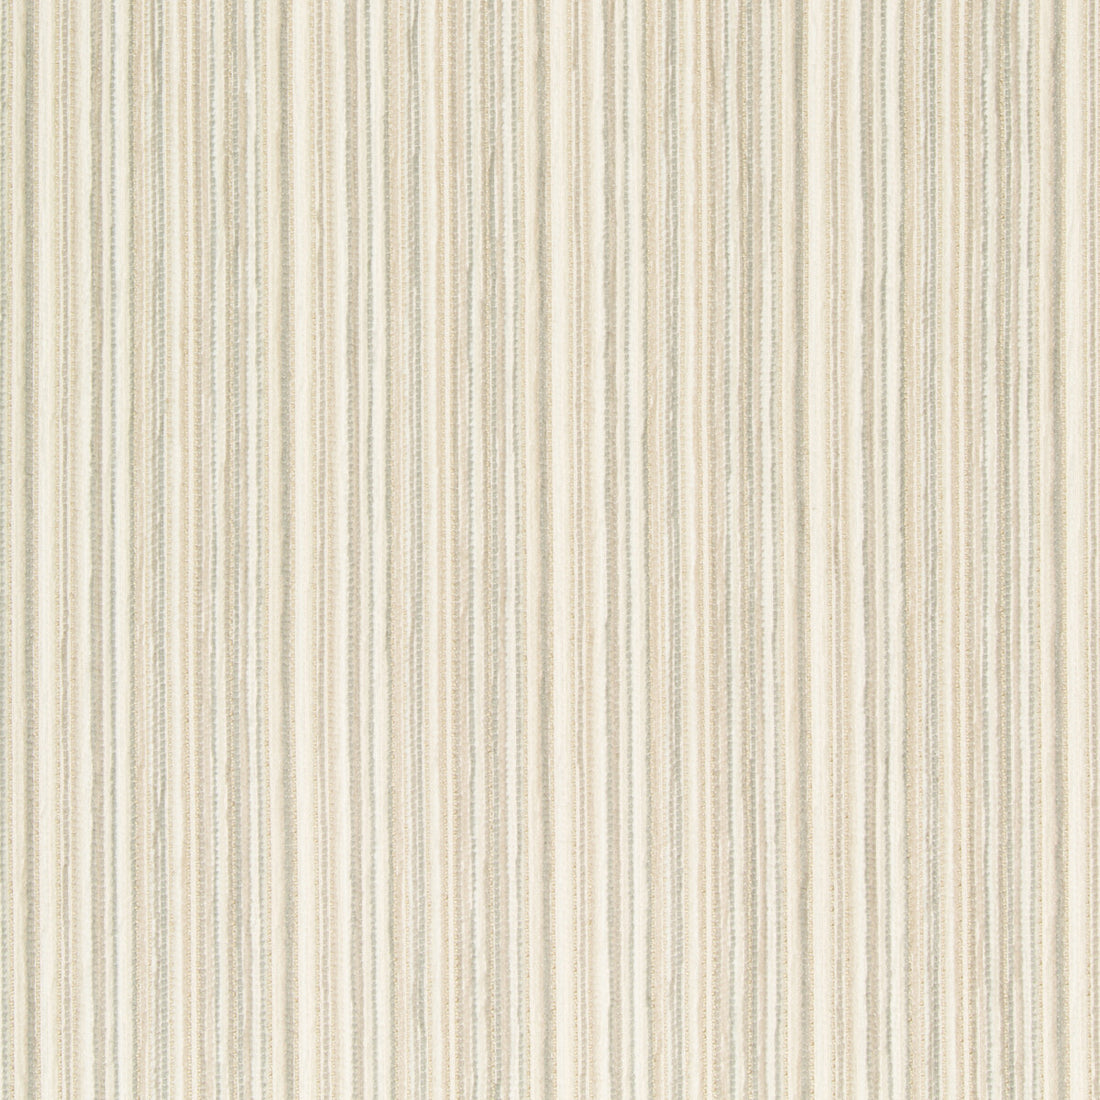 Kravet Contract fabric in 34740-1611 color - pattern 34740.1611.0 - by Kravet Contract in the Incase Crypton Gis collection